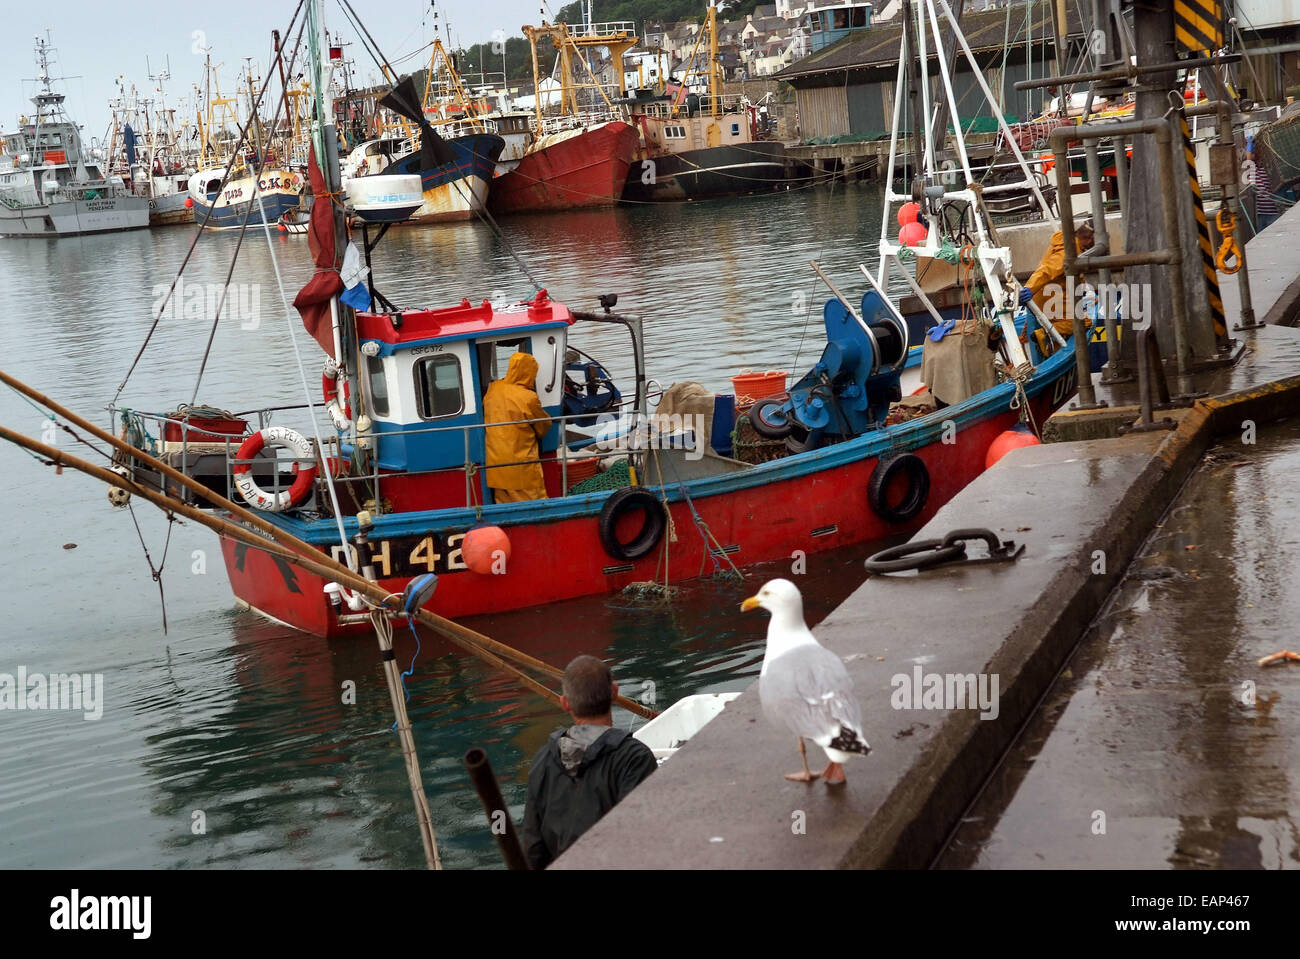 Newlyn harbour and marina, Cornwall, Uk, showing the catch of crabs being unloaded from a fishing boat Stock Photo